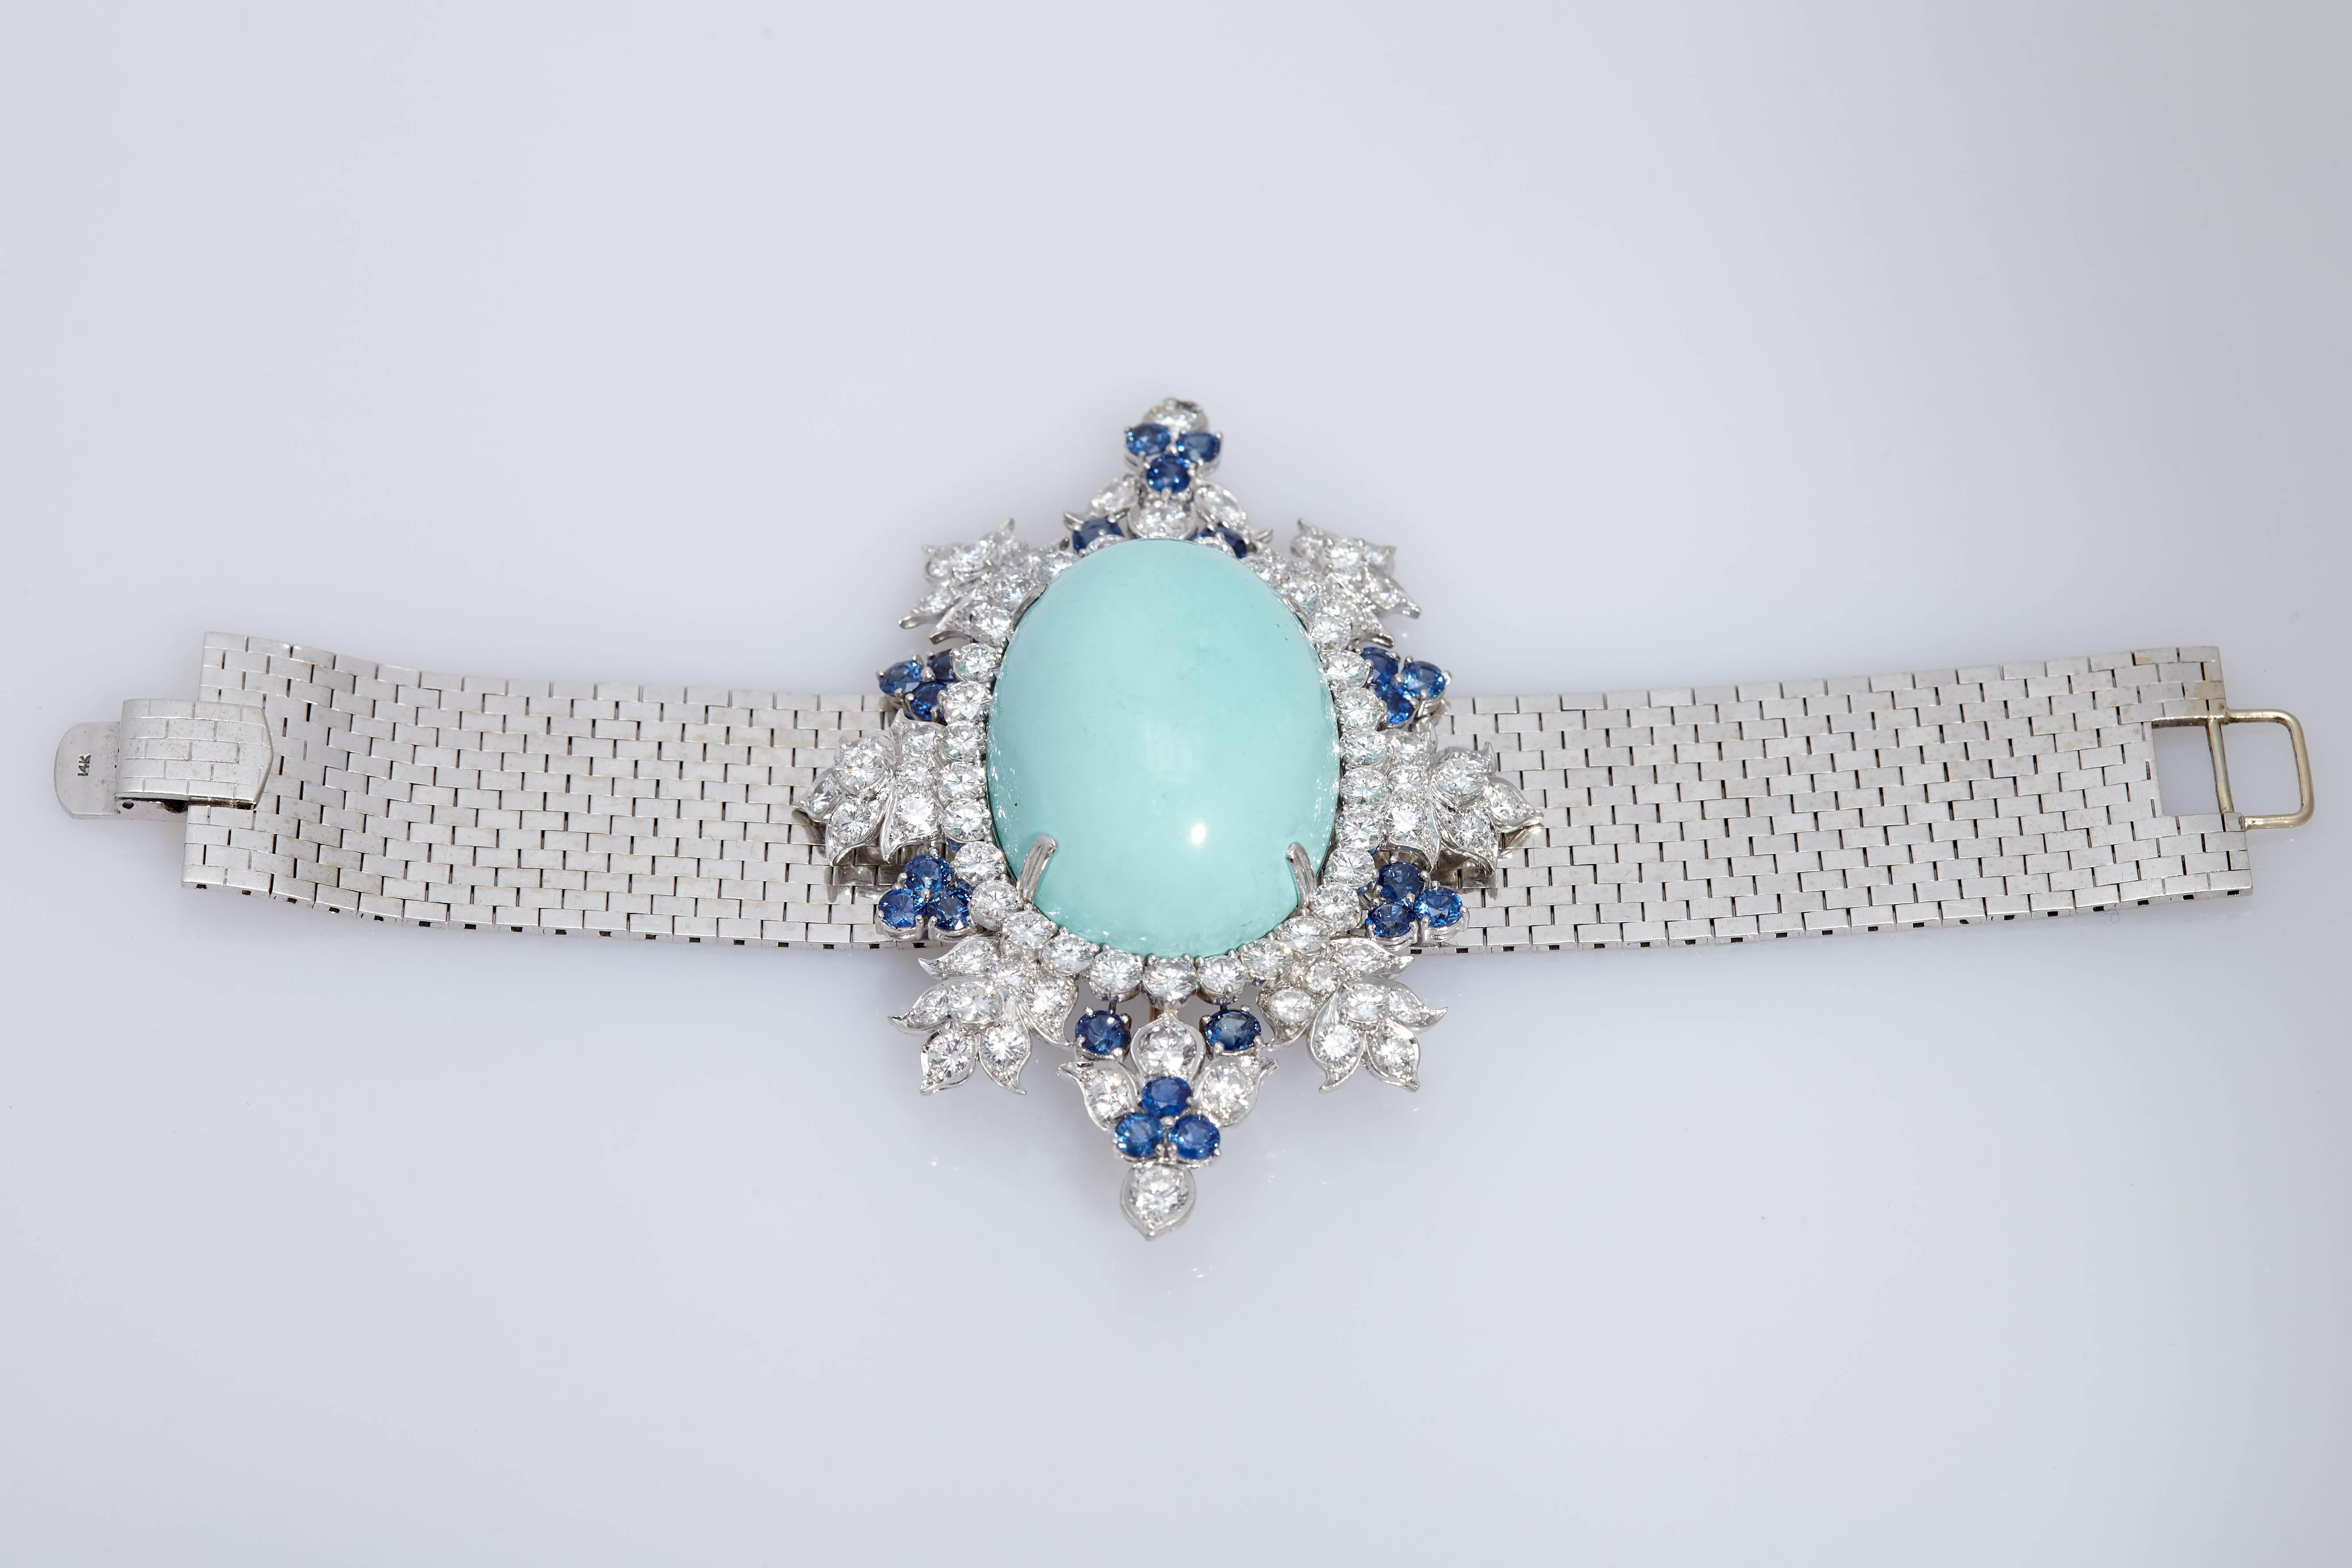 An beautiful bracelet in platinum and 14kt white gold with turquoise, sapphires and diamonds (circa 20 carats). The centre-piece is detachable to be worn as a brooch.  Made in the United States, circa 1950s.